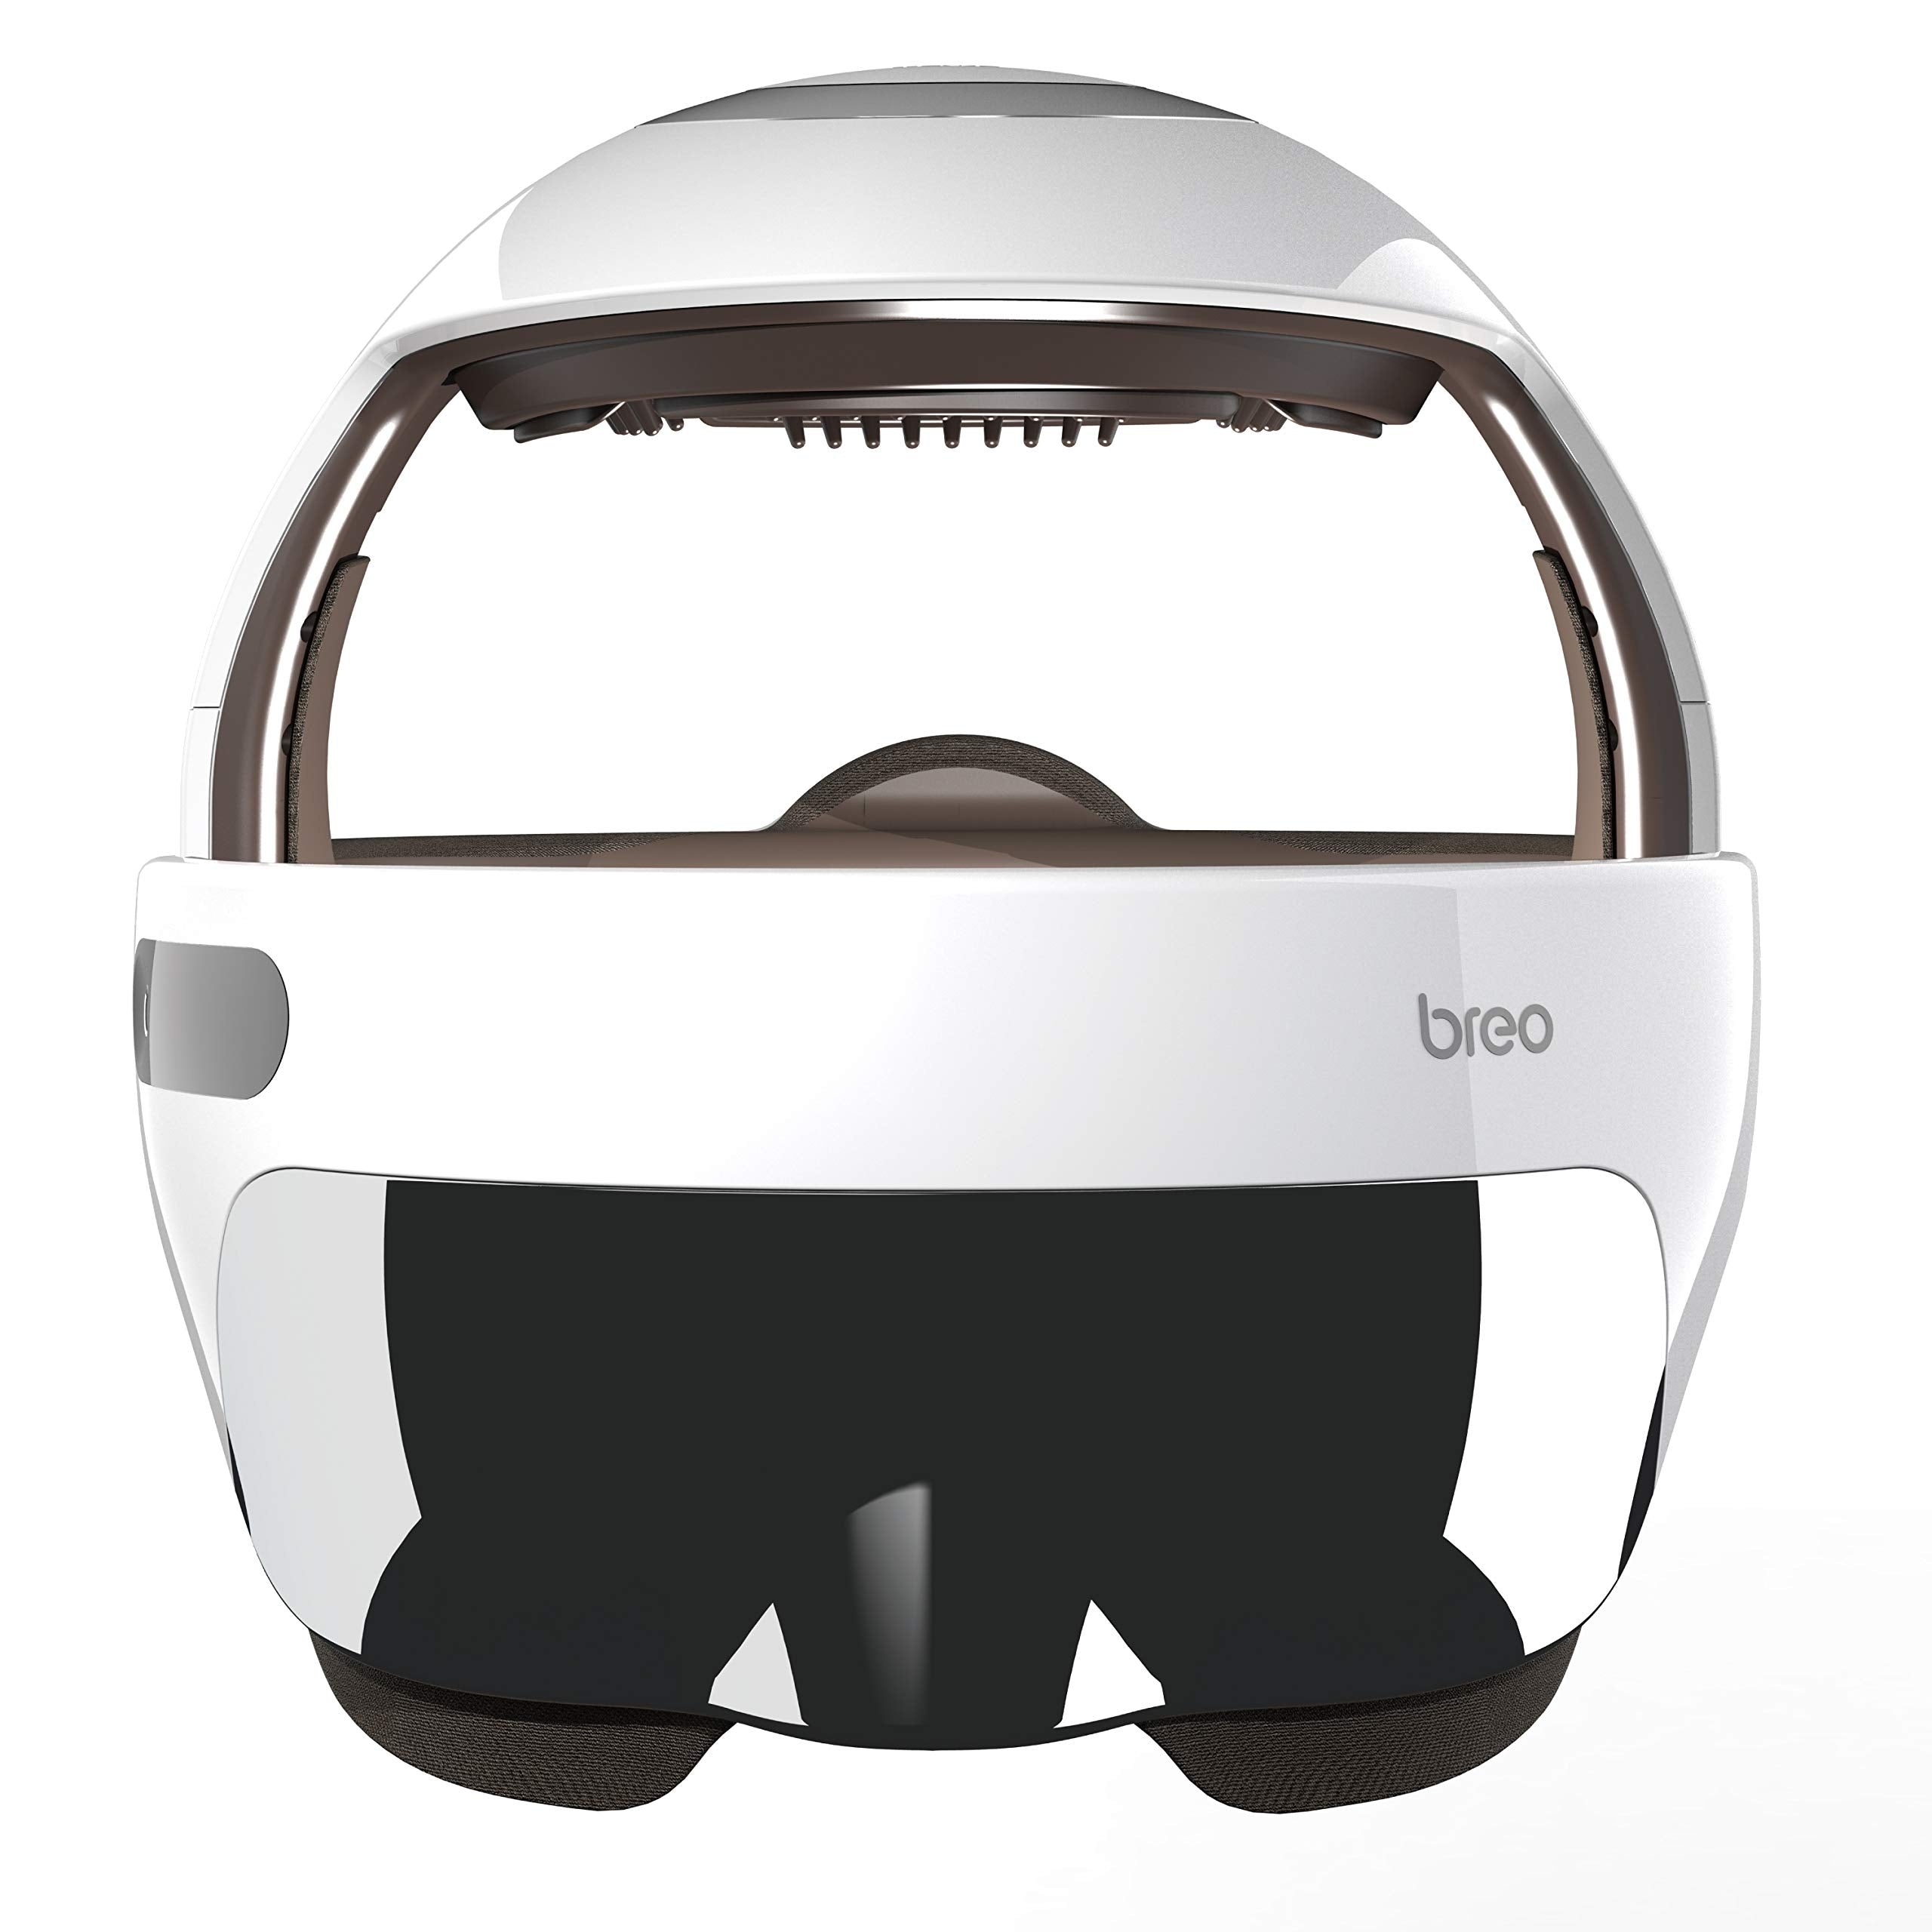 Breo iDream5s Electric Head Massager Helmet with Heat, Kneading, Air Compression (7753005990126)